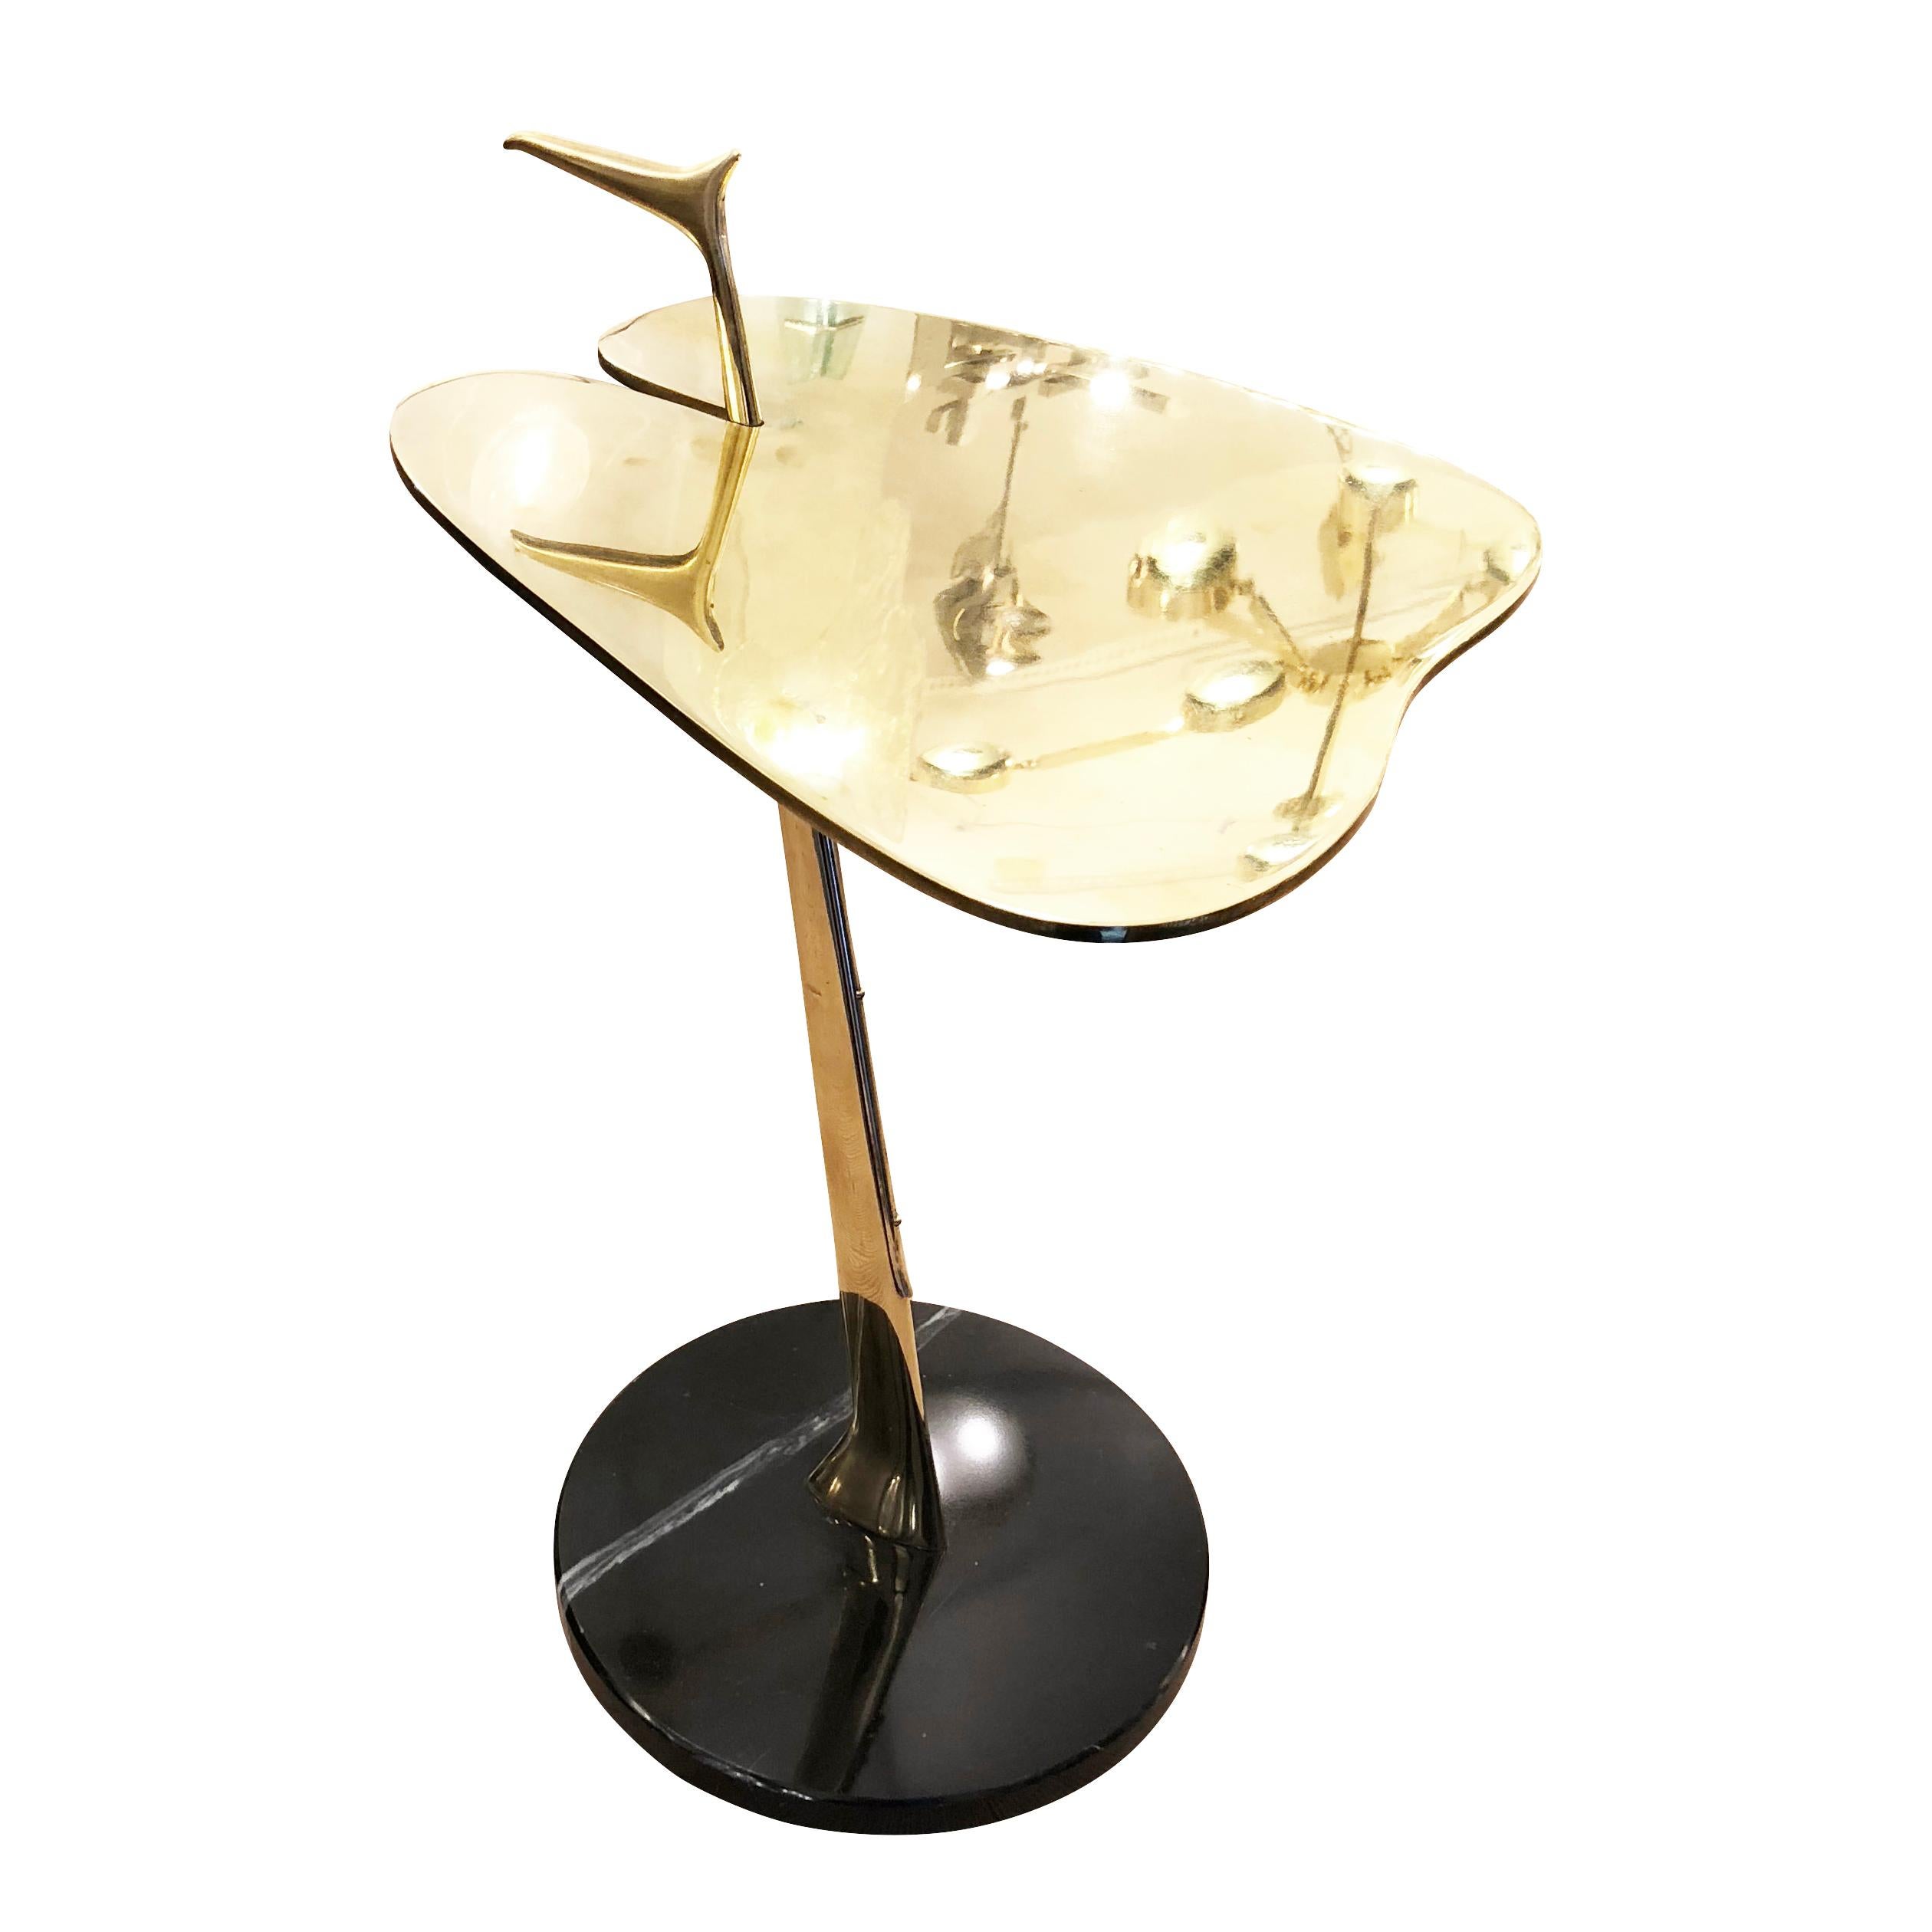 Rare side table with an organically shaped top and slanted support ending in a black marble base. Brass and marble construction. The handle with its distinctive shape is a great detail to note.

Condition: Excellent vintage condition, minor wear